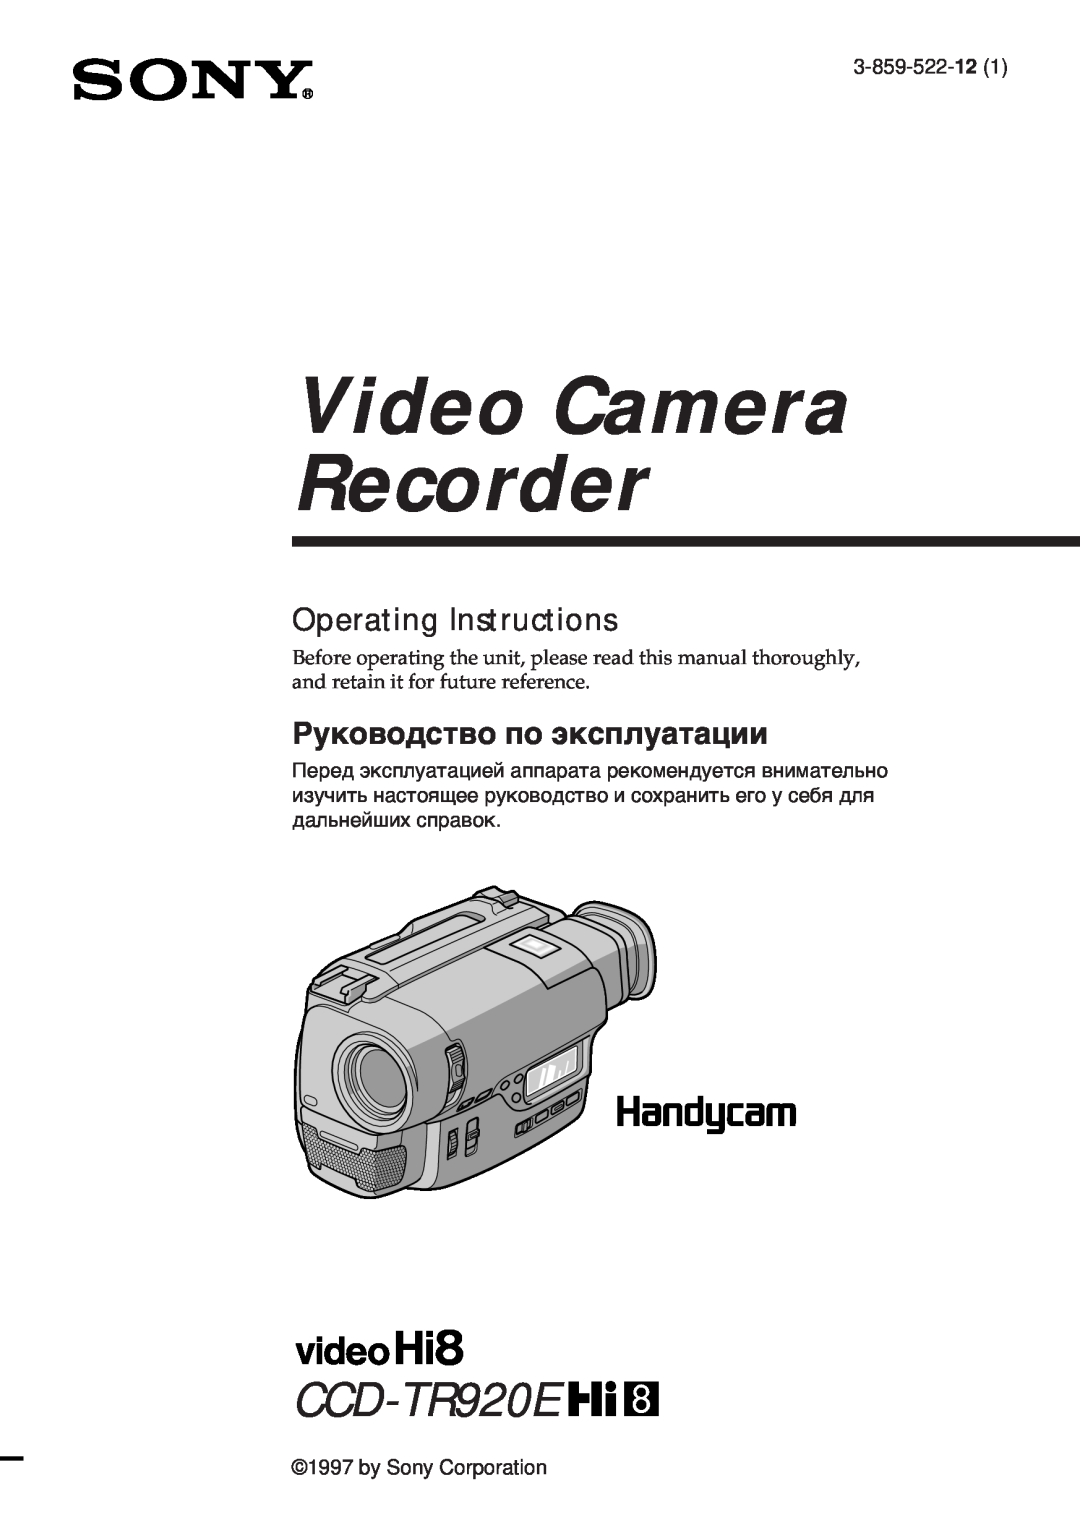 Sony CCD-TR920E operating instructions 3-859-522-12, by Sony Corporation, Video Camera Recorder, Operating Instructions 